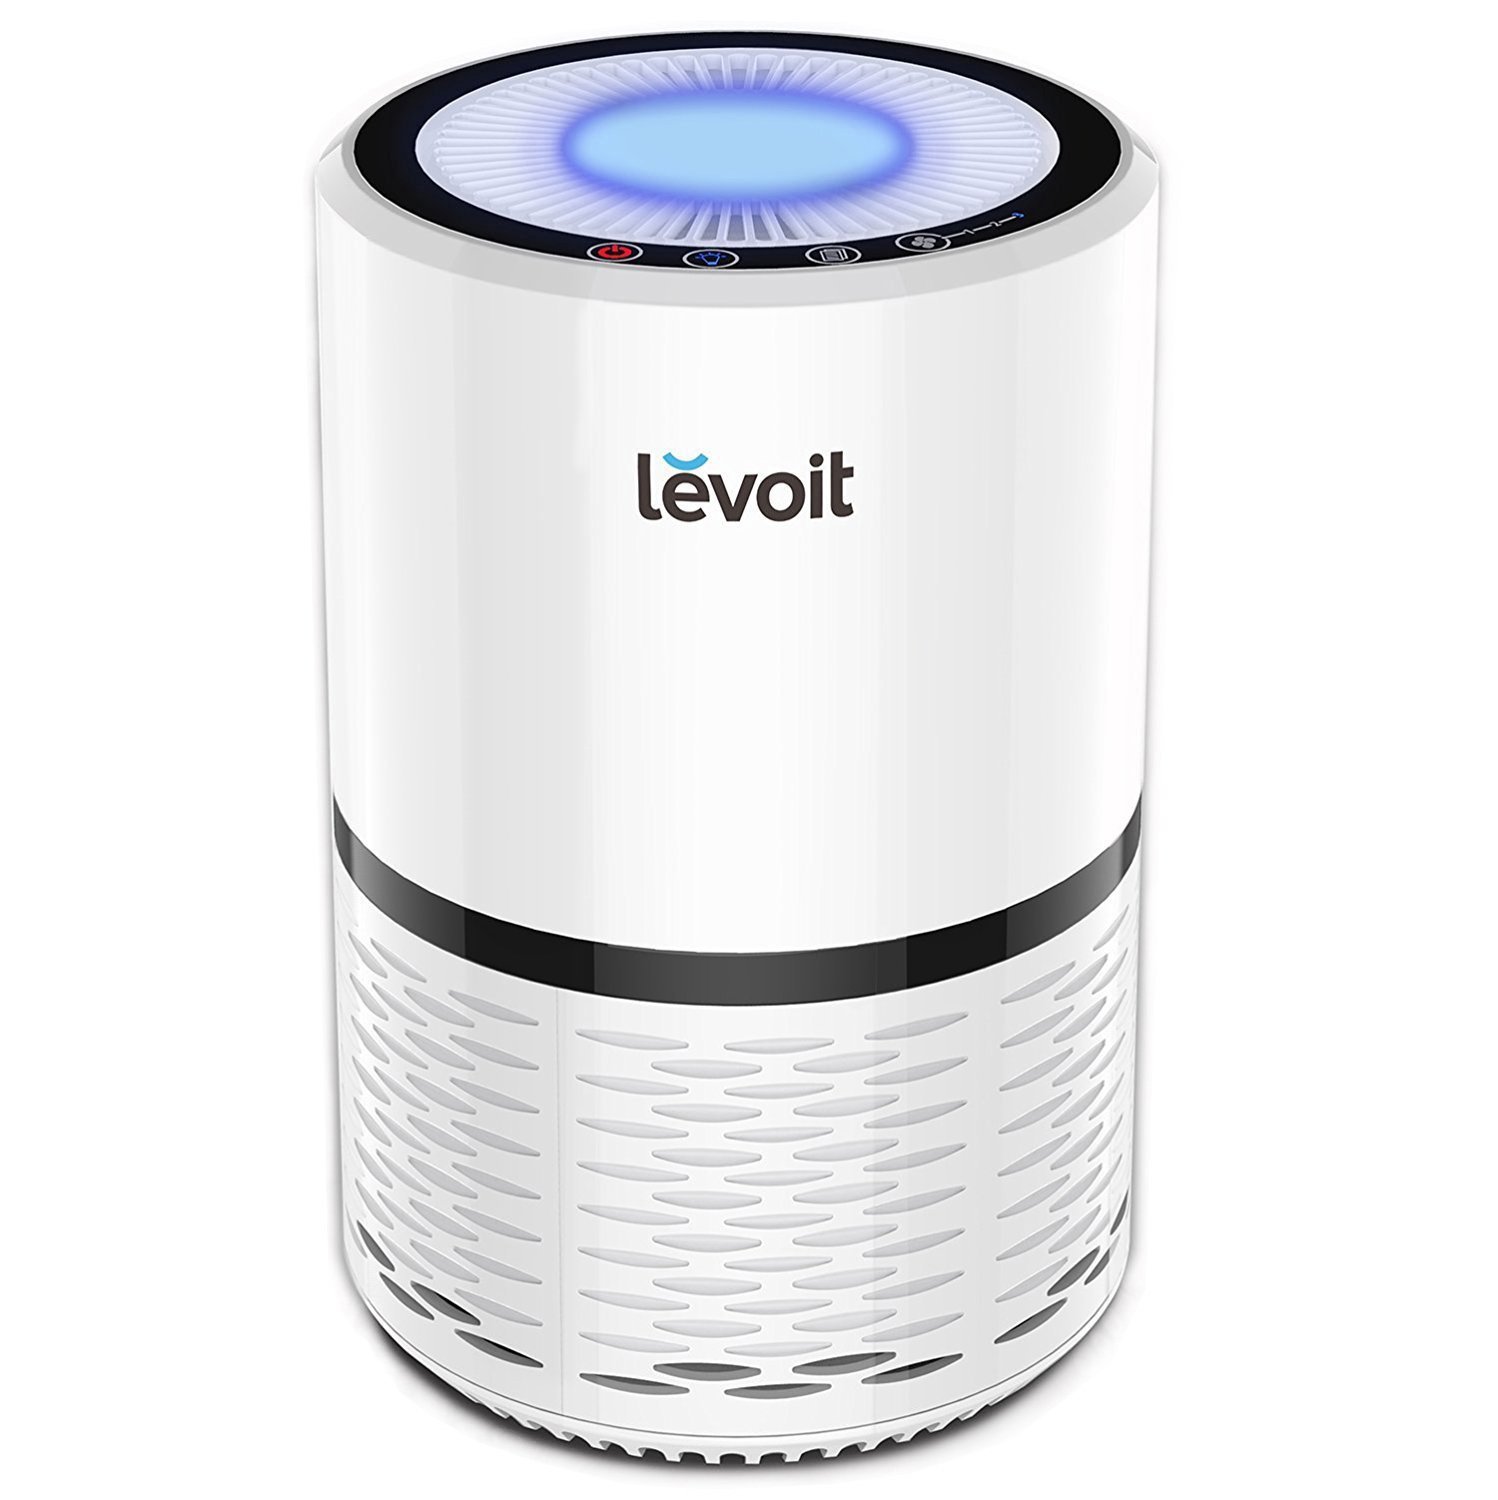 Levoit LV-H132 Air Purifier with True Hepa Filter for Smoke, Bacteria, and More - image 1 of 9